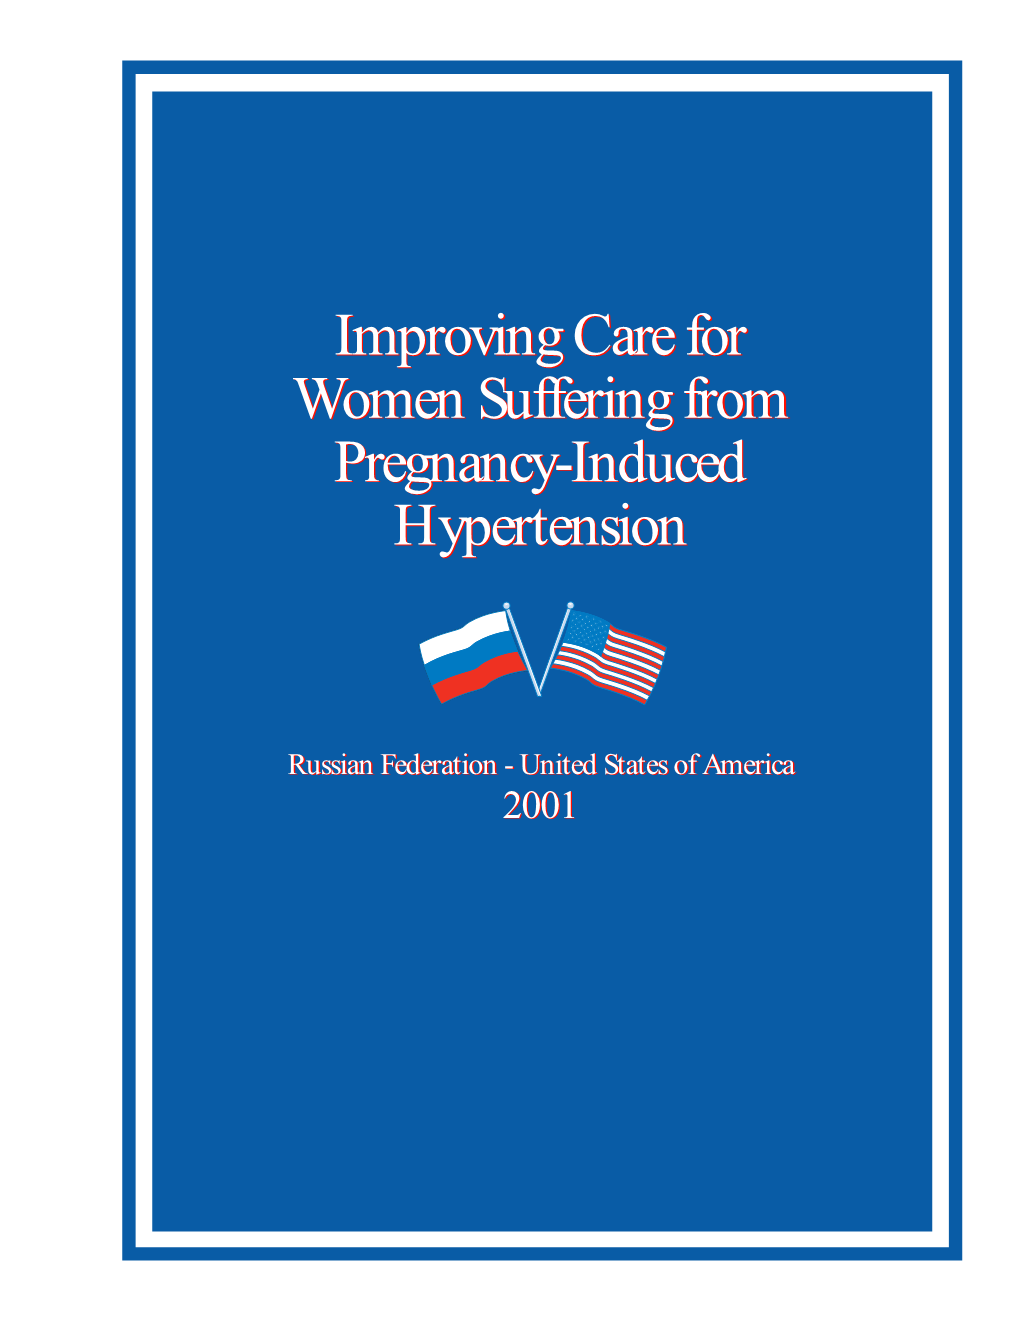 Improving Care for Women Suffering from Pregnancy-Induced Hypertension